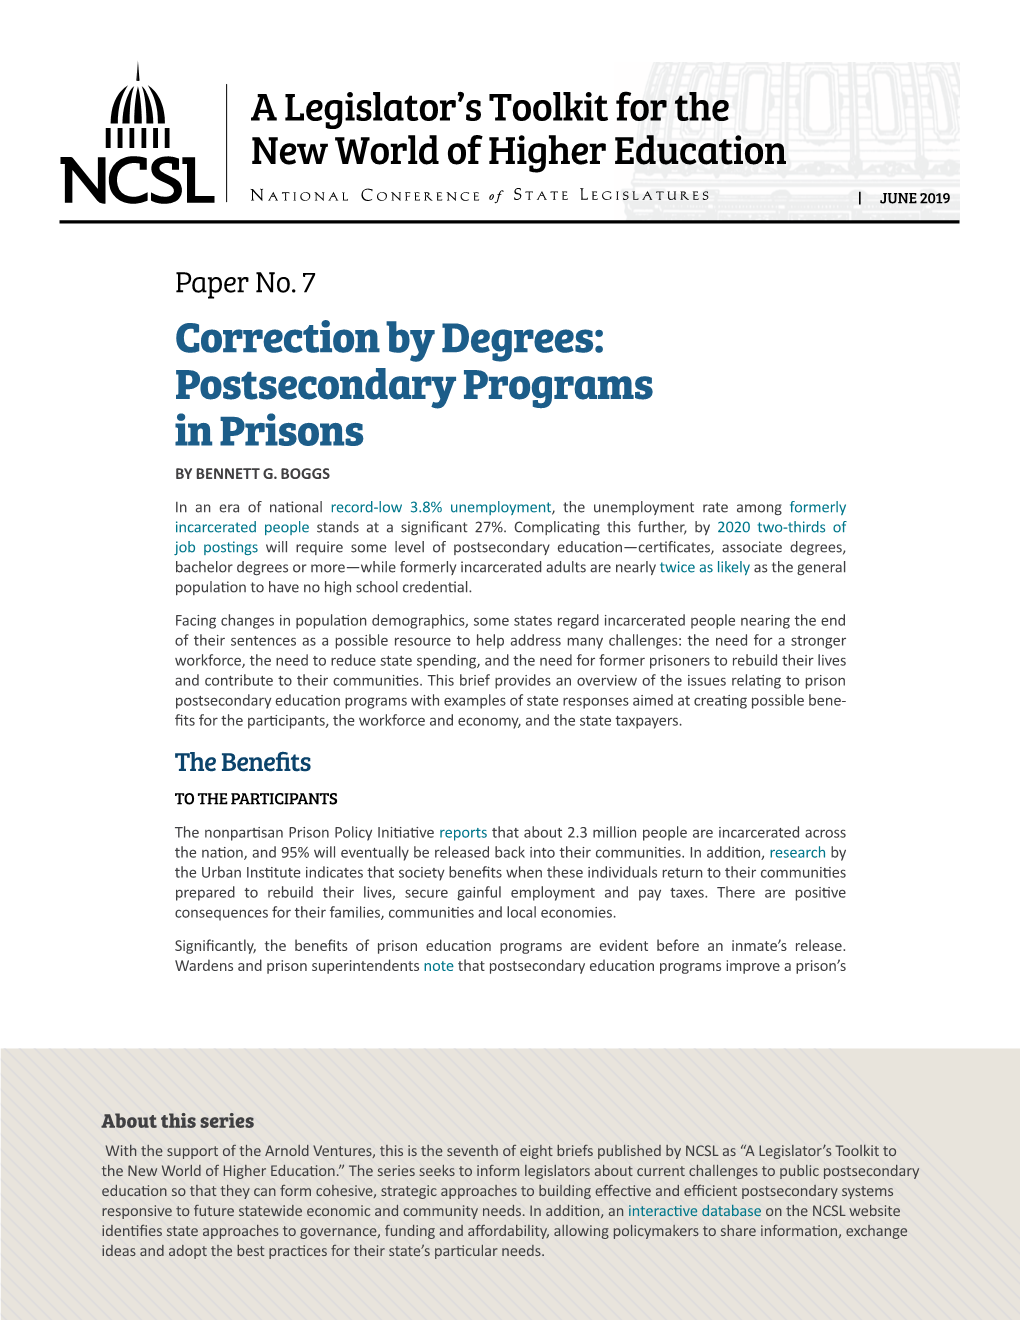 Correction by Degrees: Postsecondary Programs in Prisons by BENNETT G